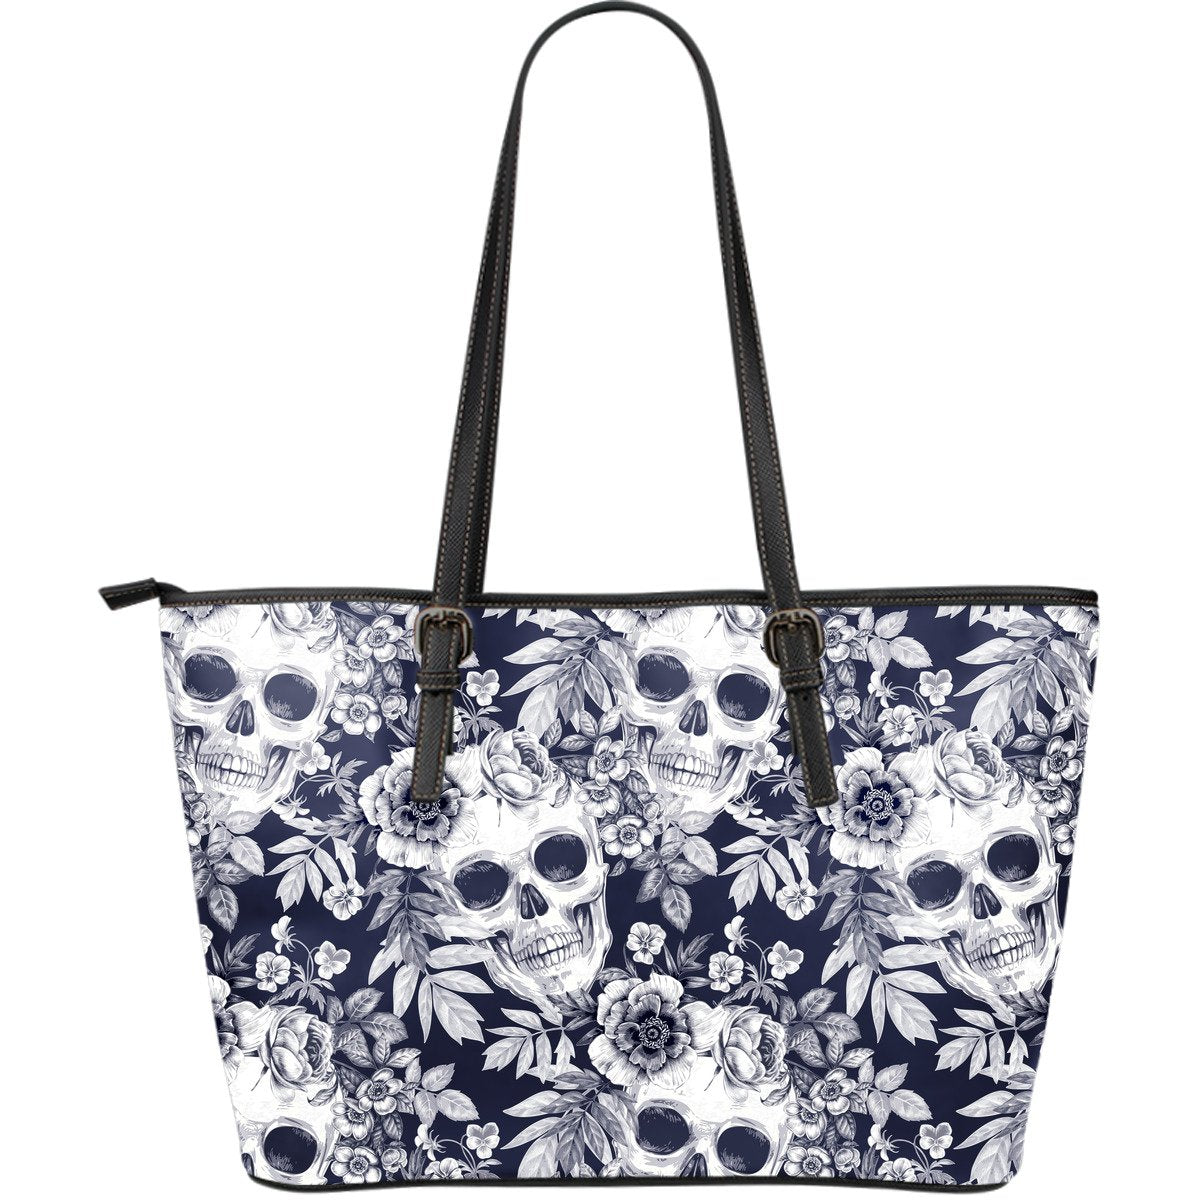 Skull Floral Beautiful Large Leather Tote Bag